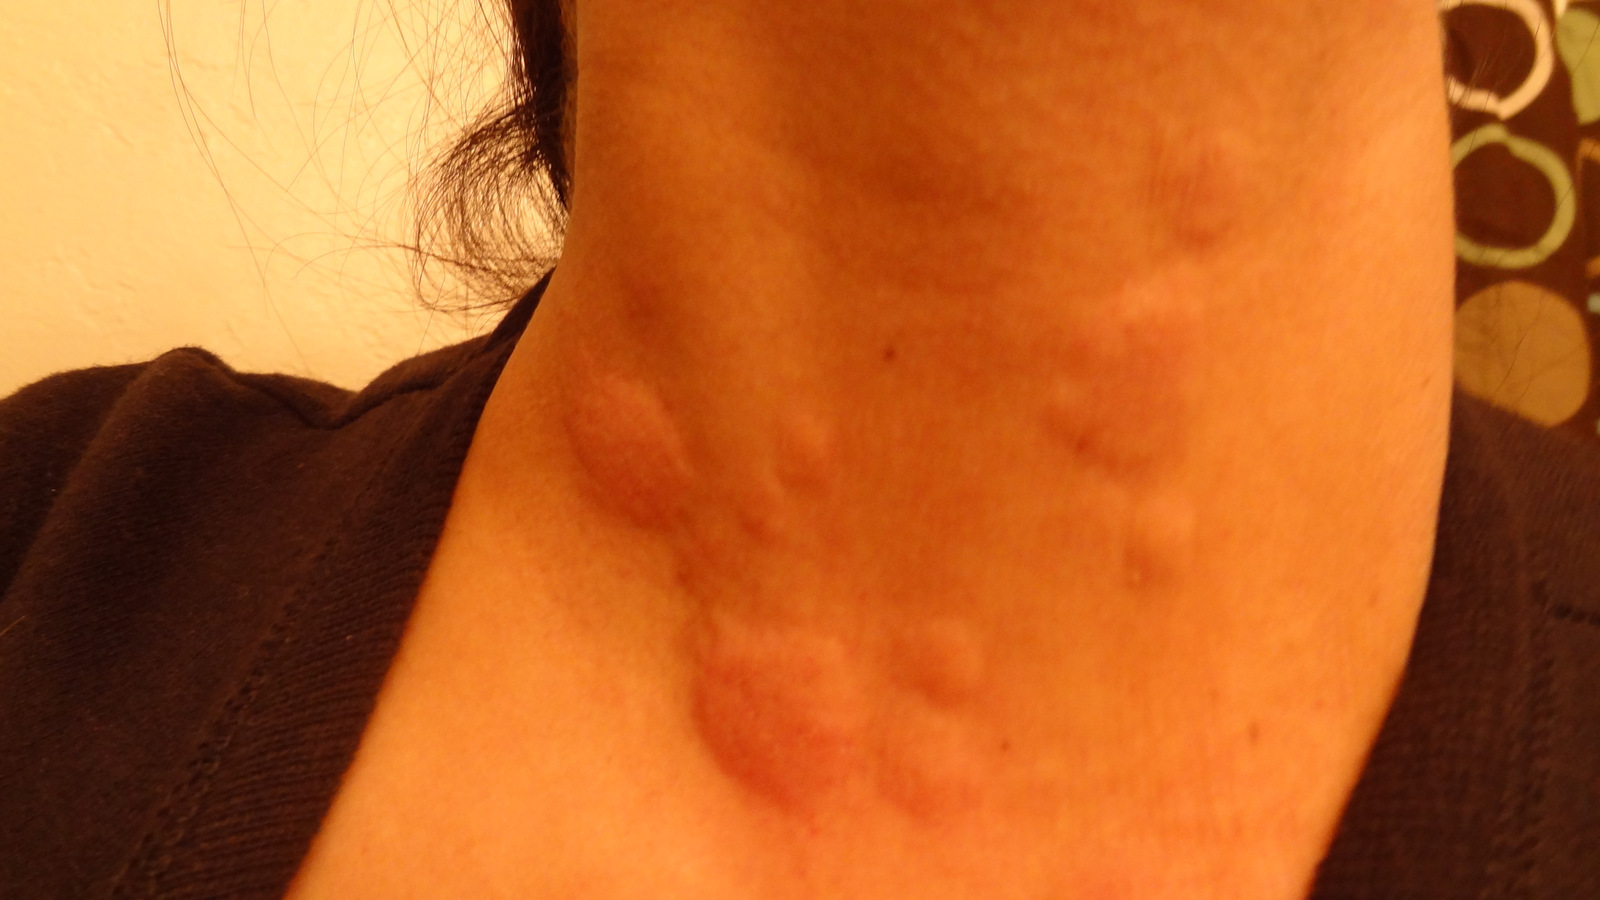 Consult Dr. Attili for treatment of skin hives